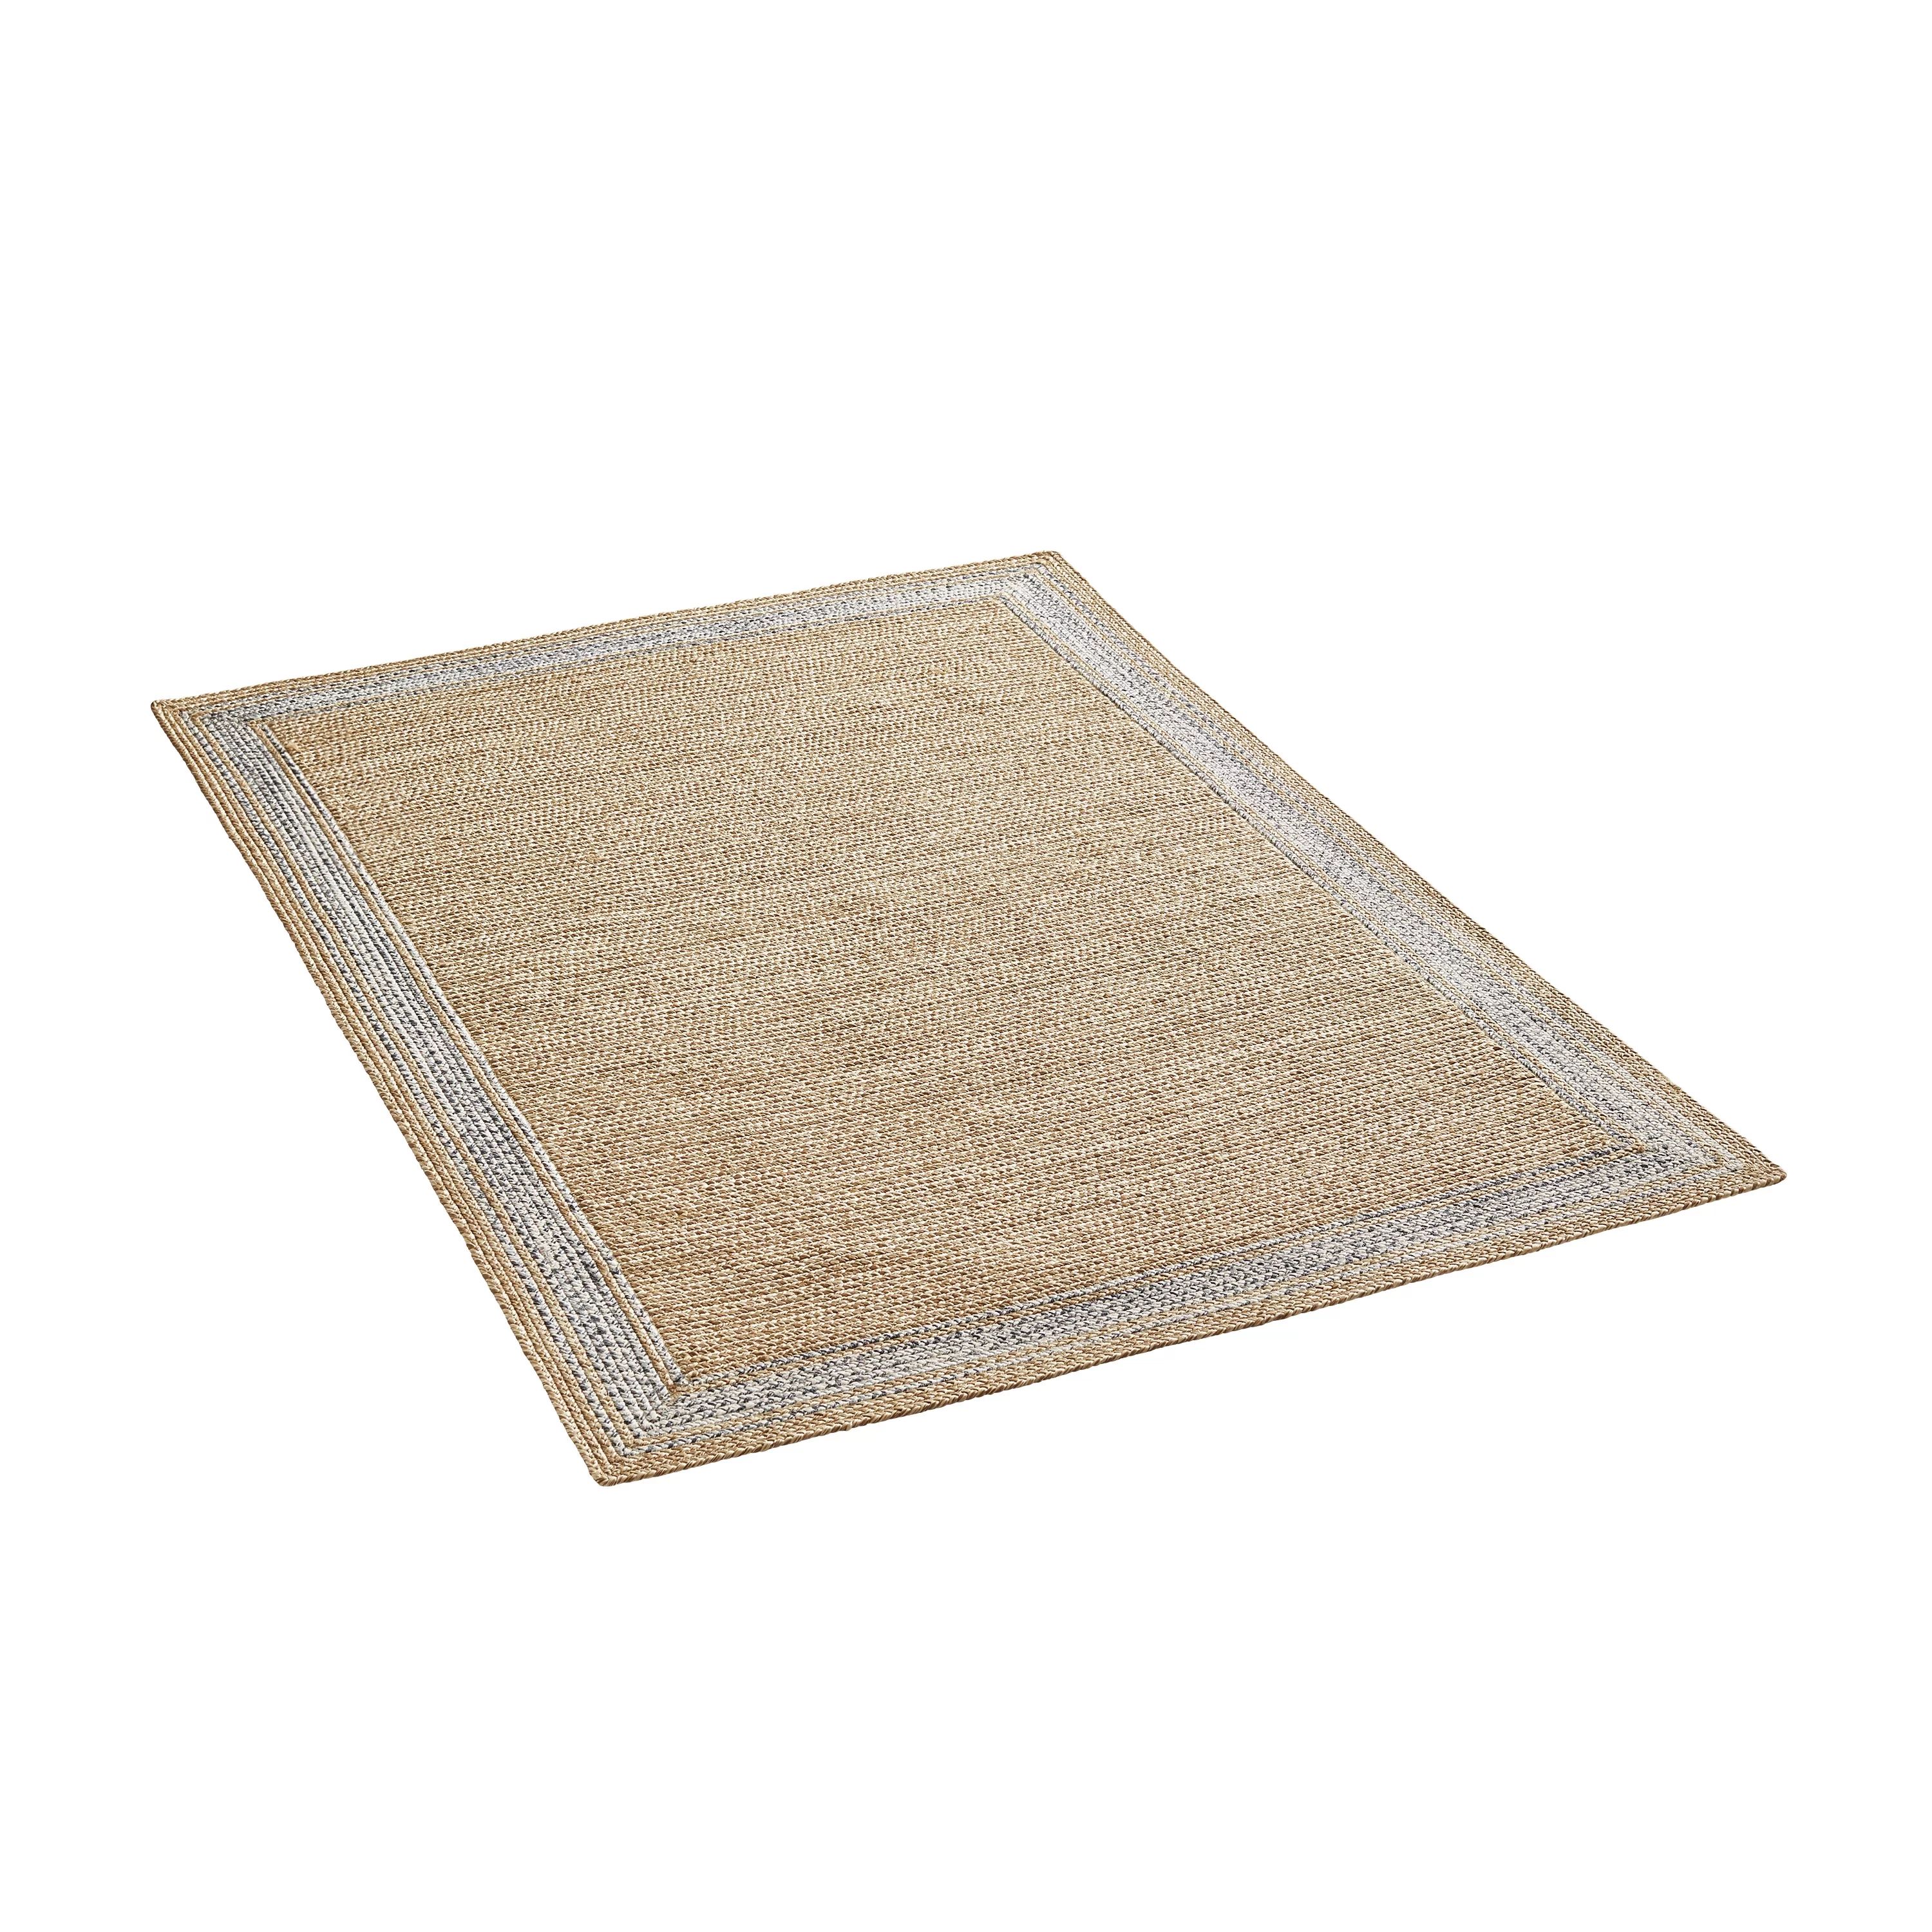 Better Homes & Gardens Denim Natural Braided Rug by Dave & Jenny Marrs, 5' x 7' | Walmart (US)